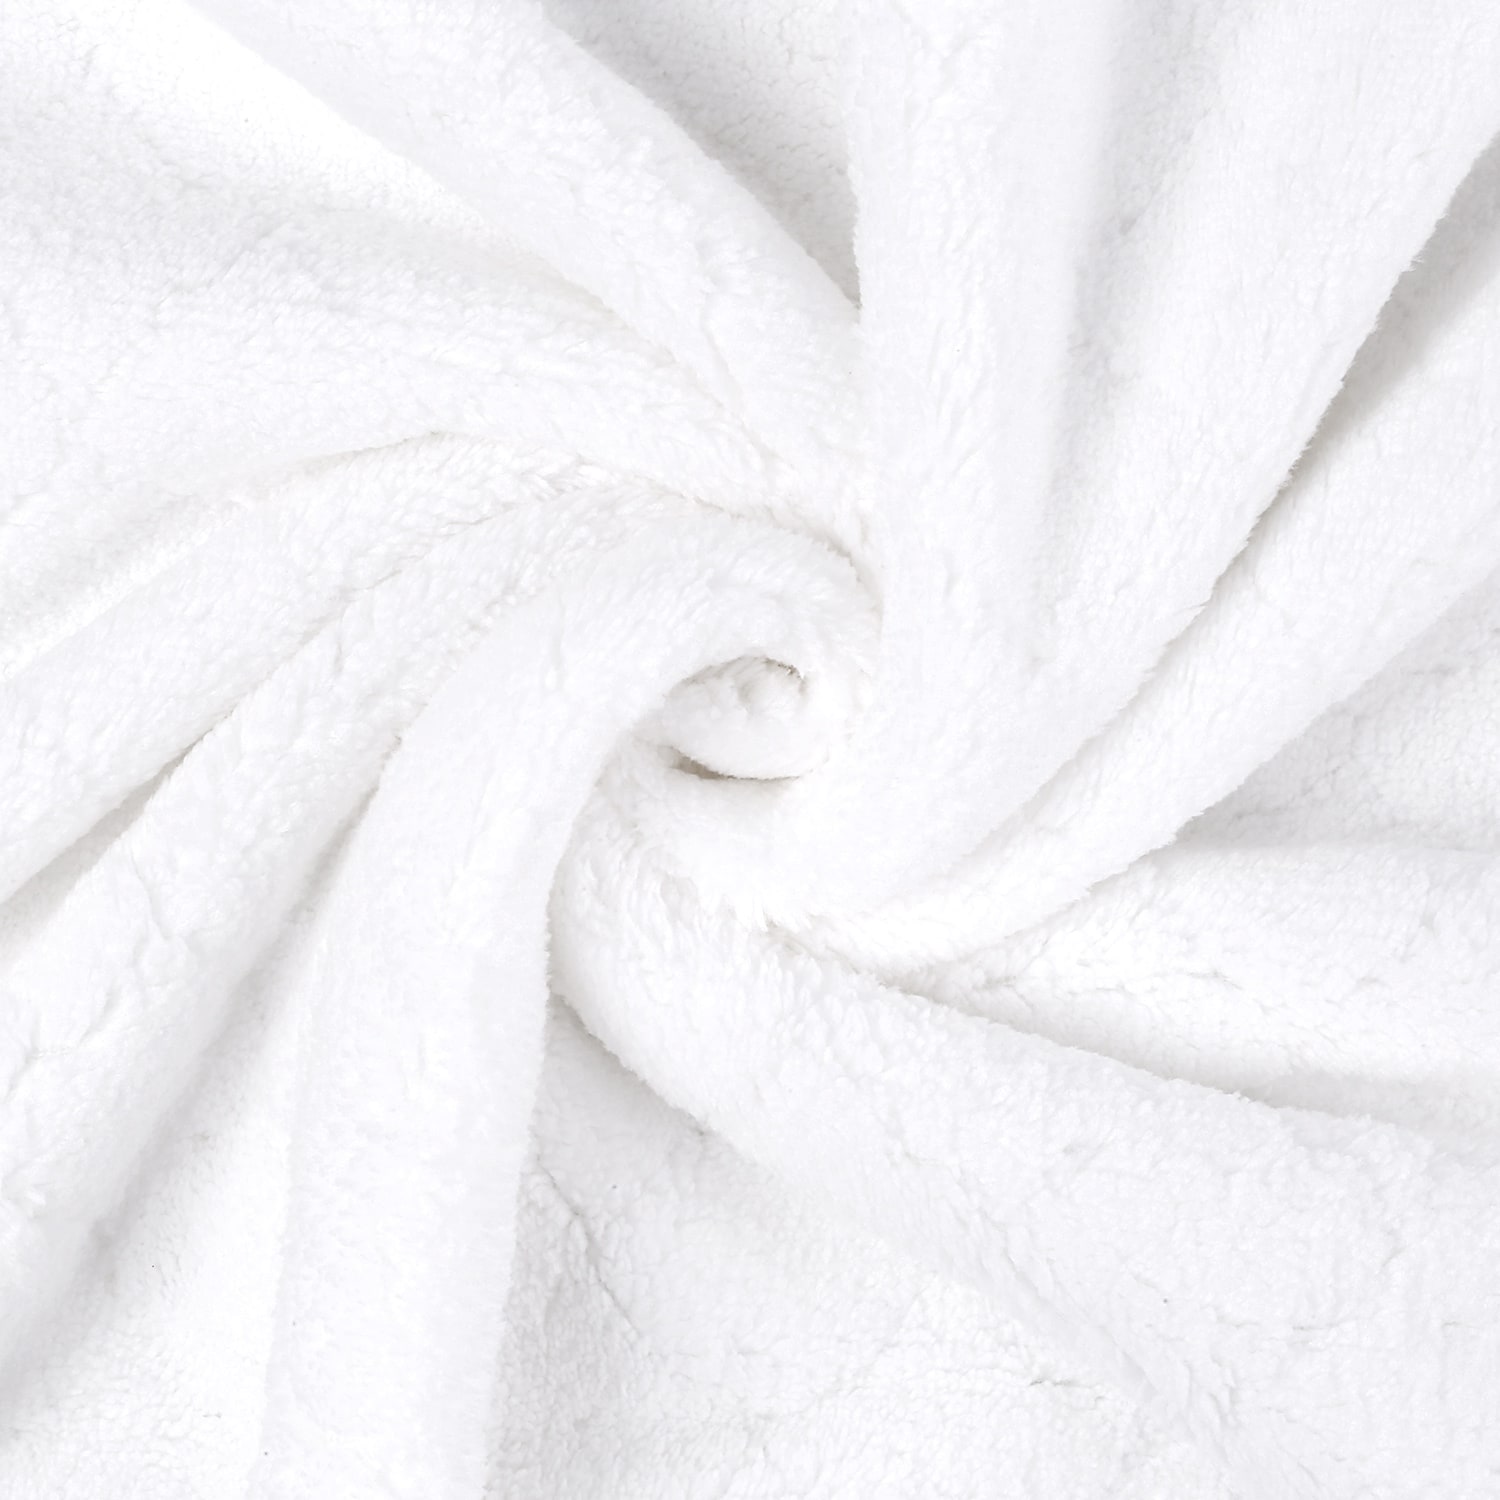 350GSM Softest Plush Fleece Towel Set Highly Absorbent Towels with